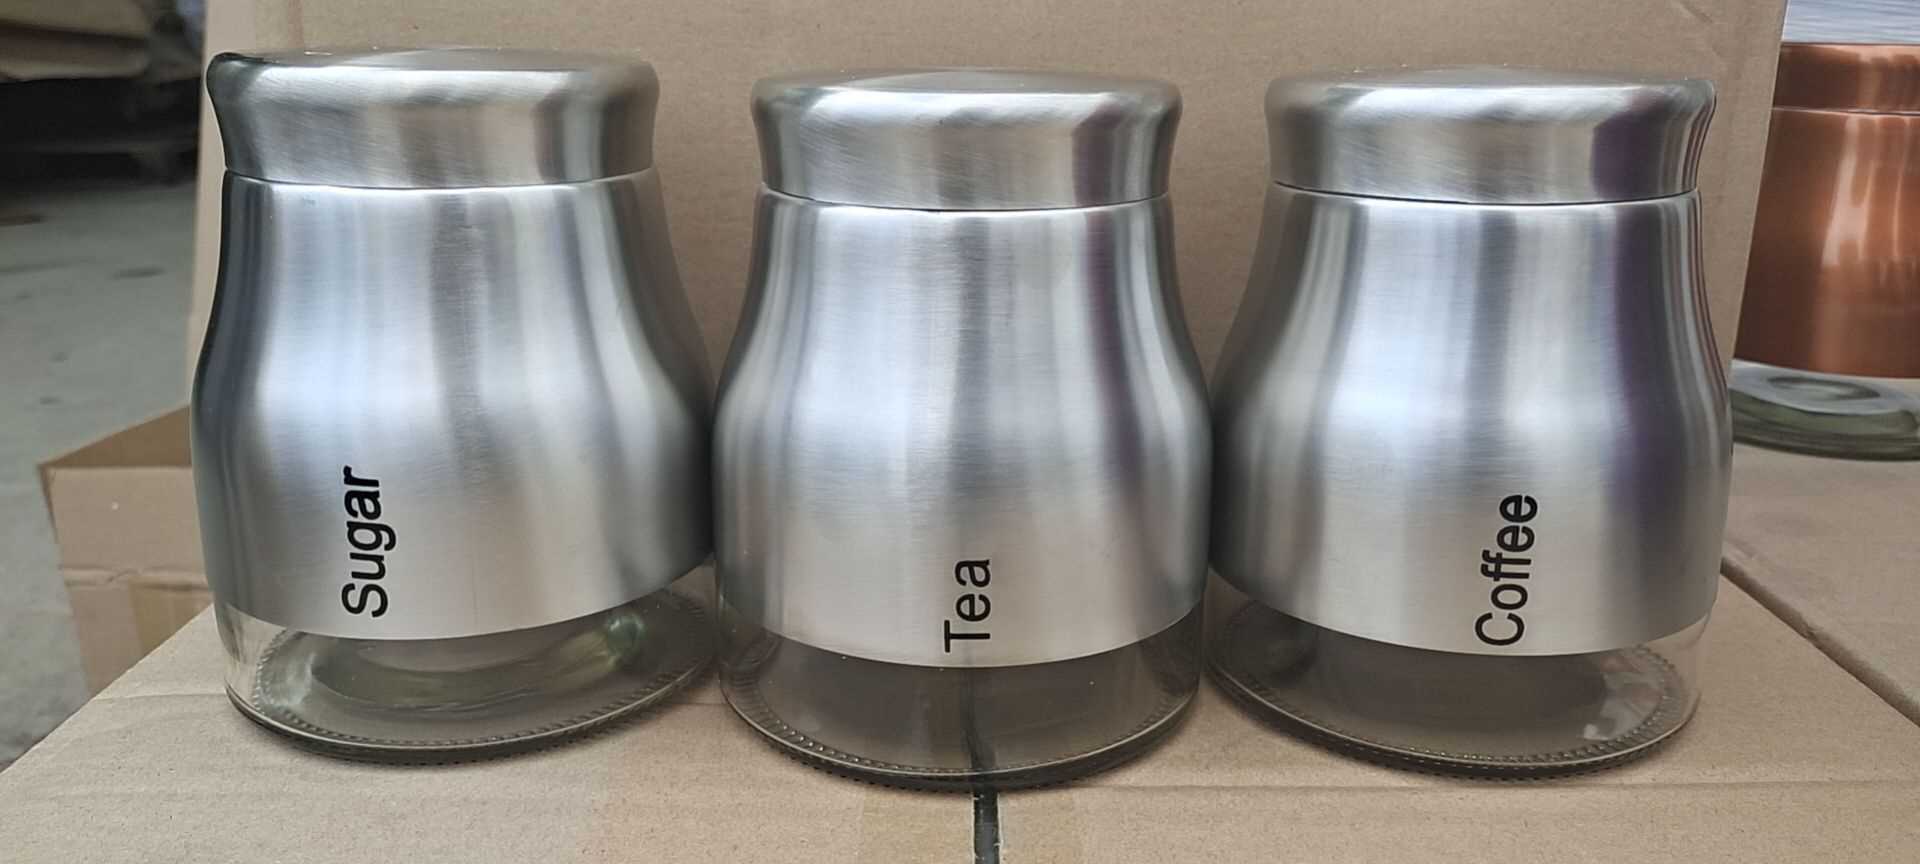 Set Of 3 Silver Storage Canisters Tea Coffee Sugar Jars Pots Food Containers